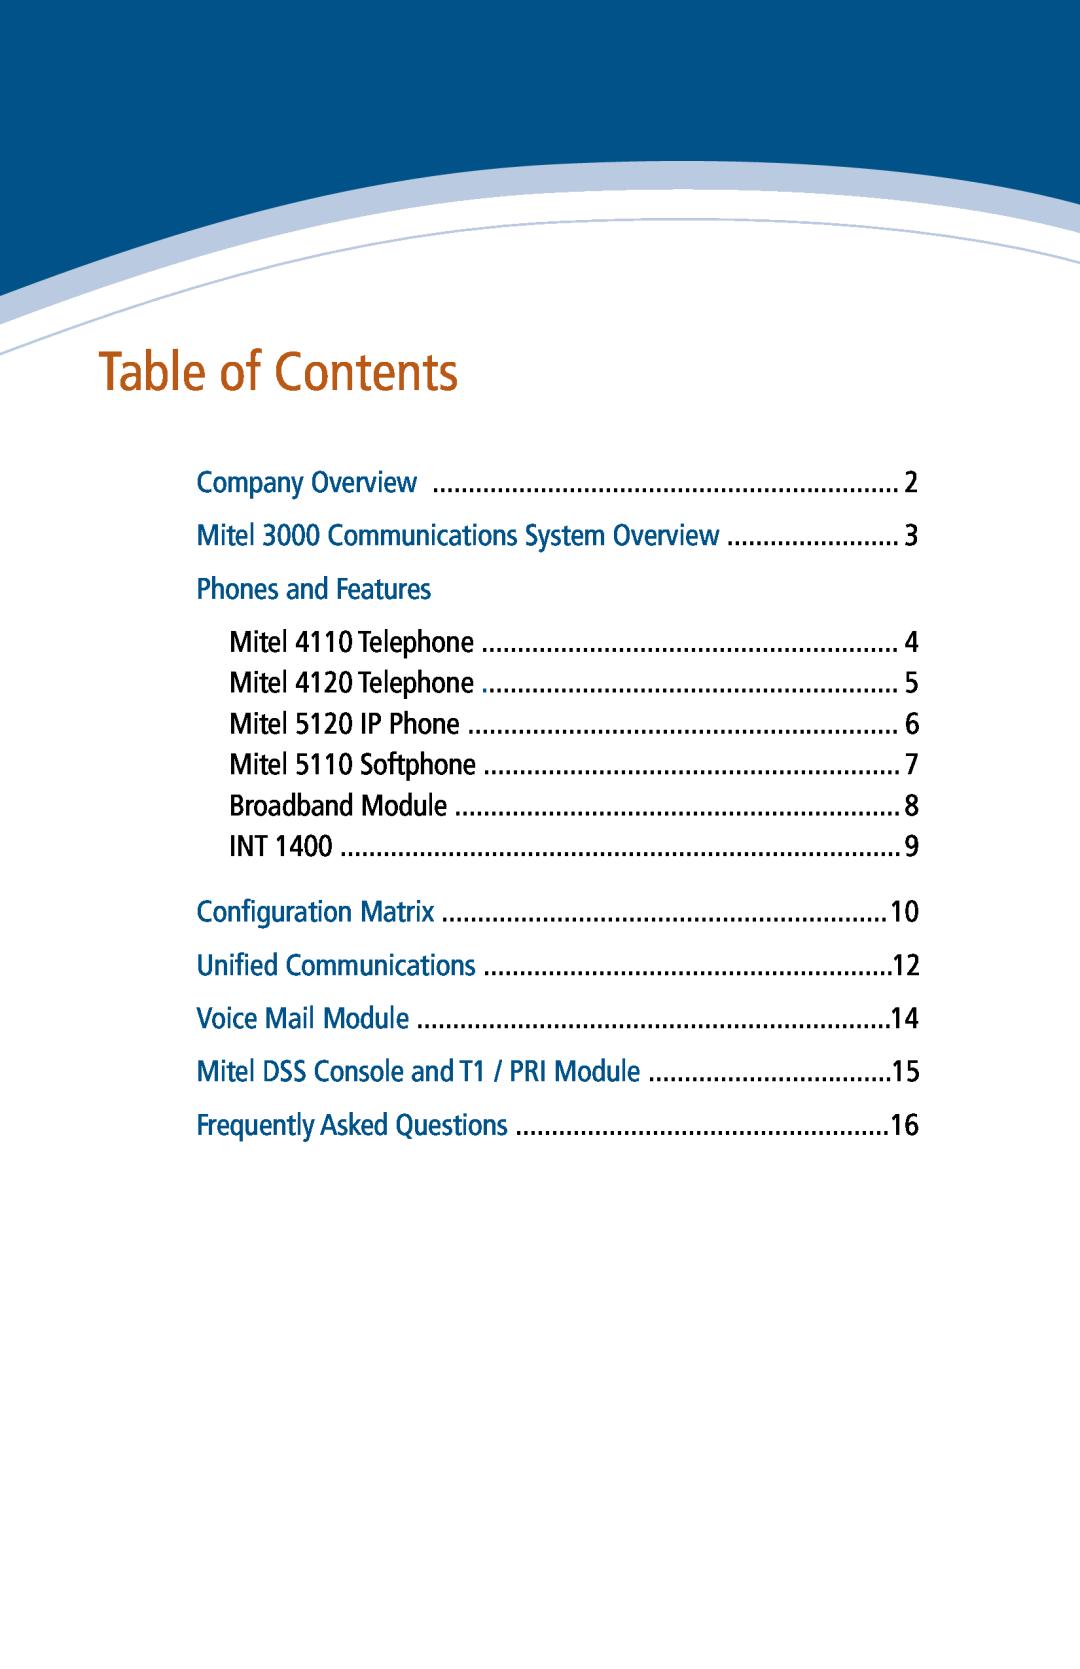 Mitel manual Table of Contents, Phones and Features, Mitel 3000 Communications System Overview 